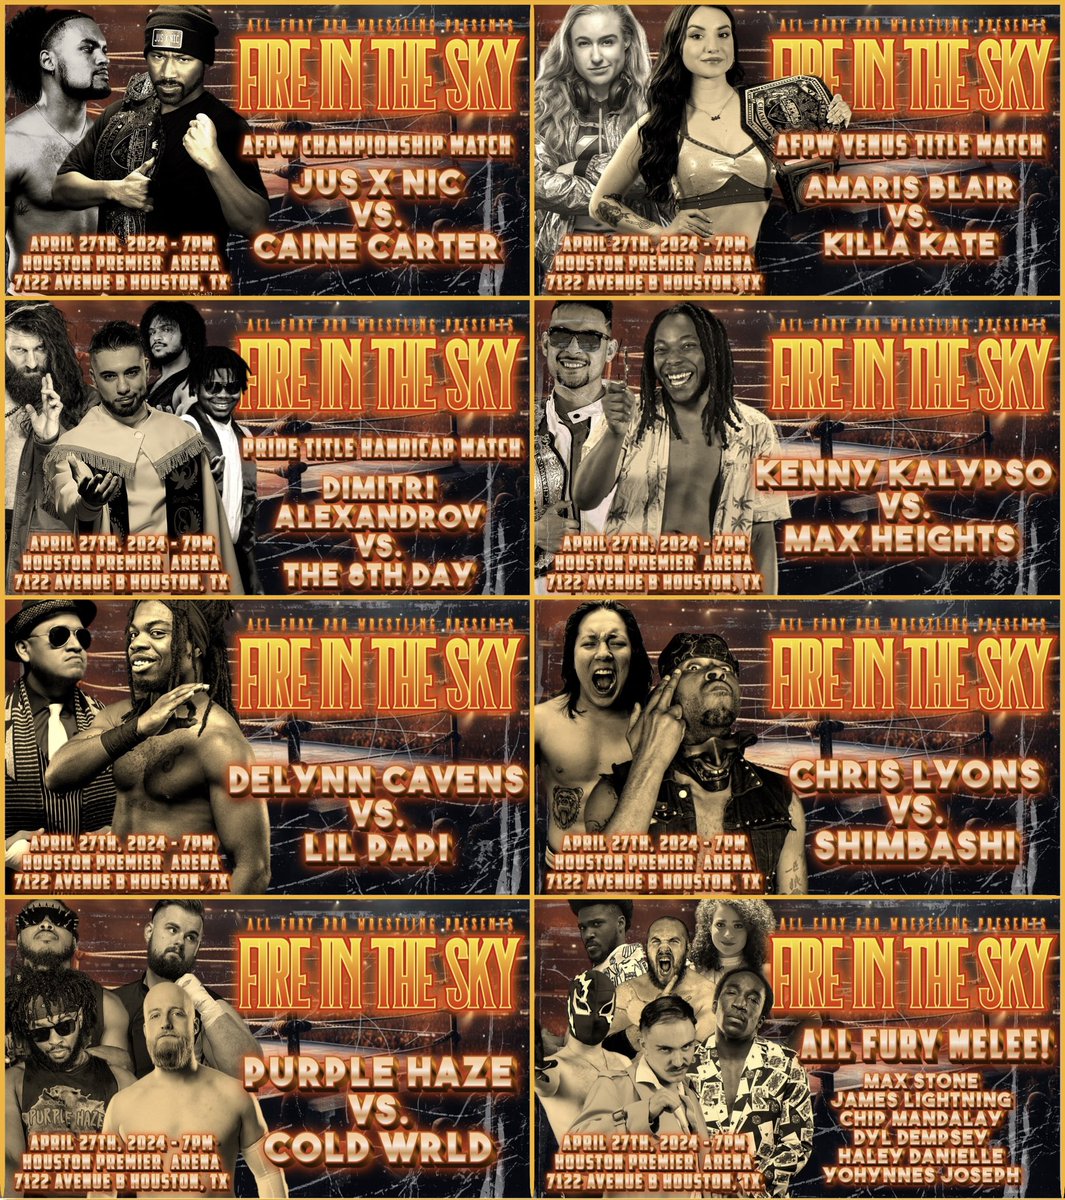 THIS SATURDAY! All Fury Pro Wrestling returns with Fire in the Sky! Get tickets now! 🎟️: eventbrite.com/e/all-fury-pro…